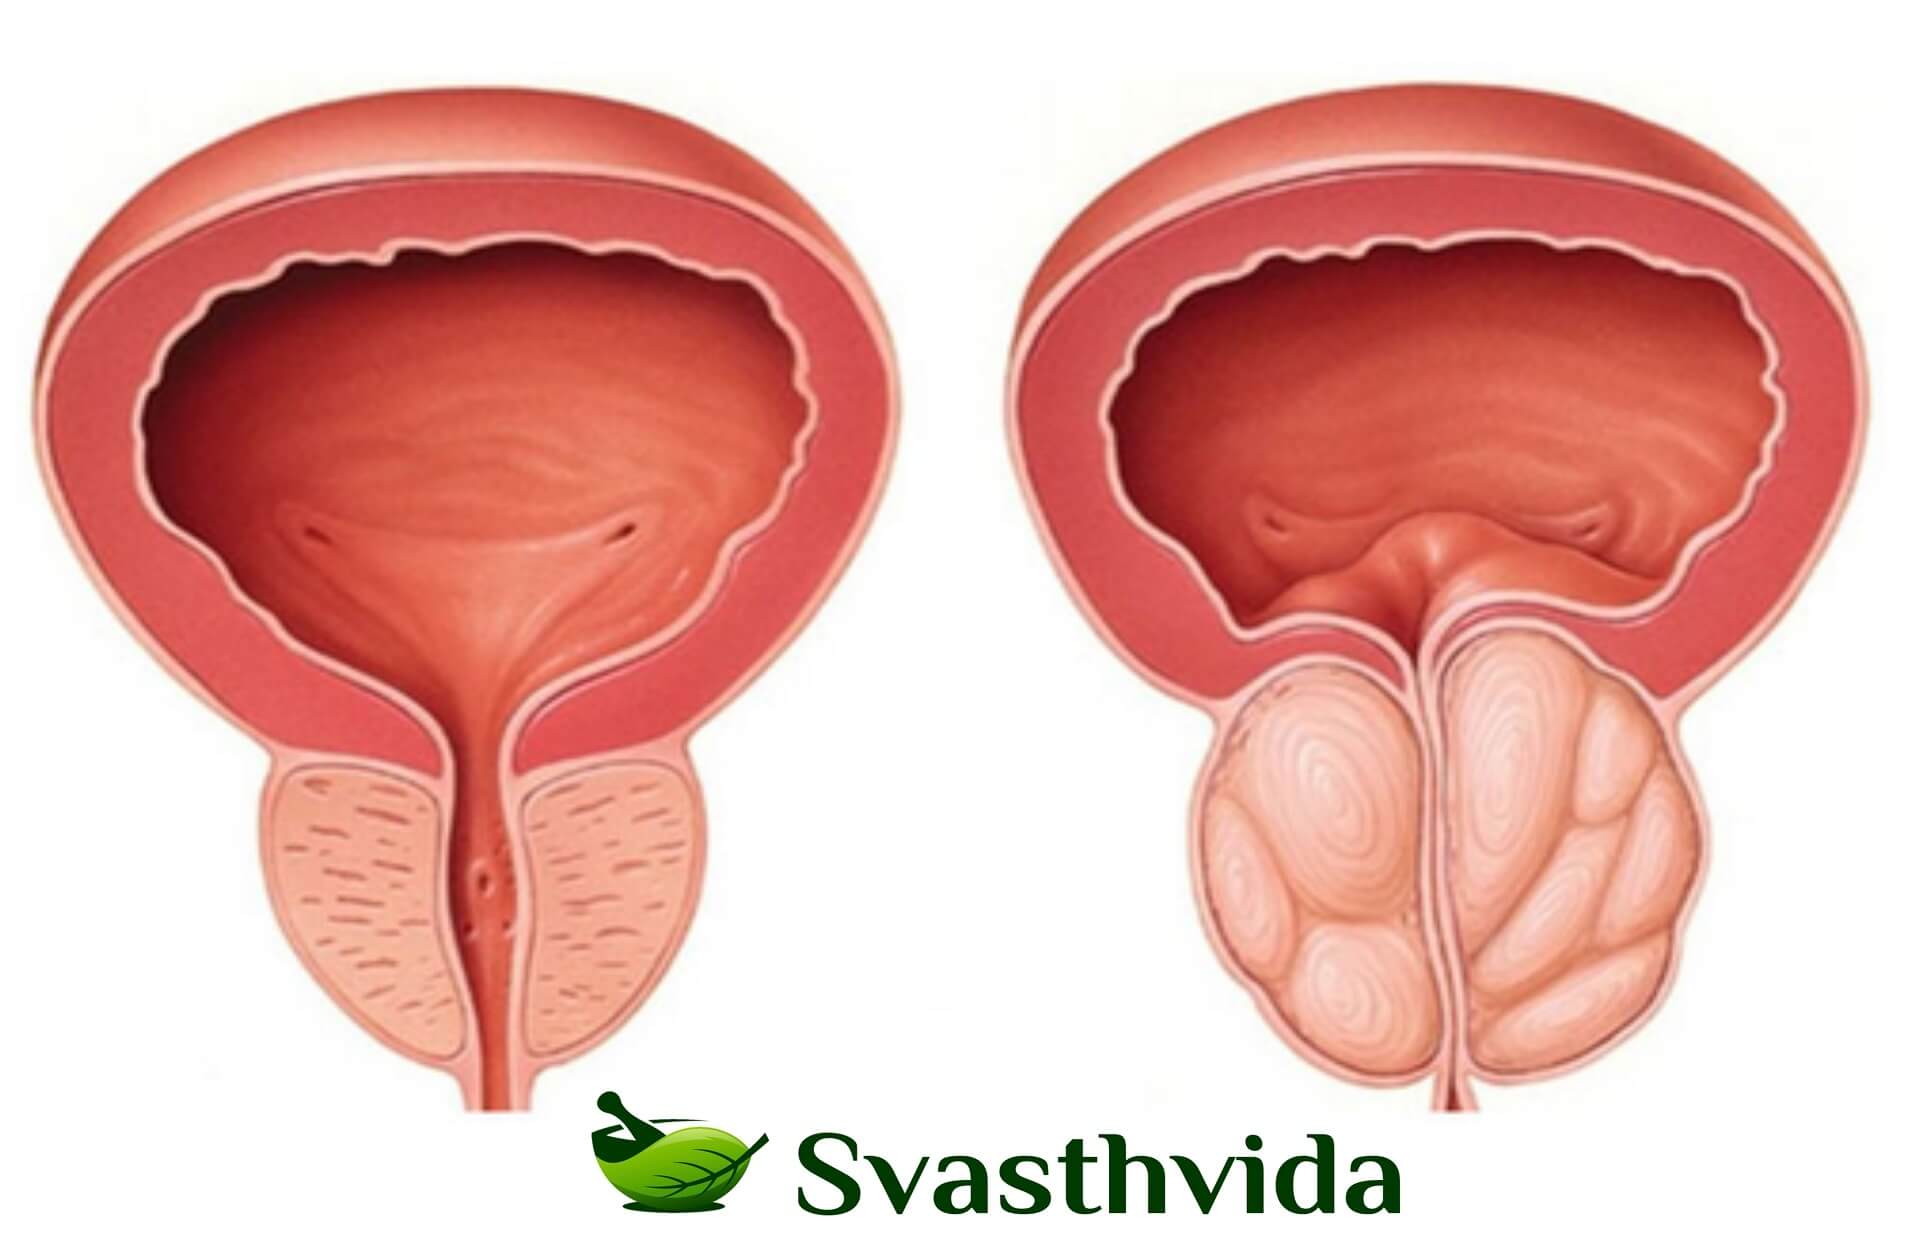 Ayurvedic Treatment For Enlarged Prostate In Bassi-Pathana